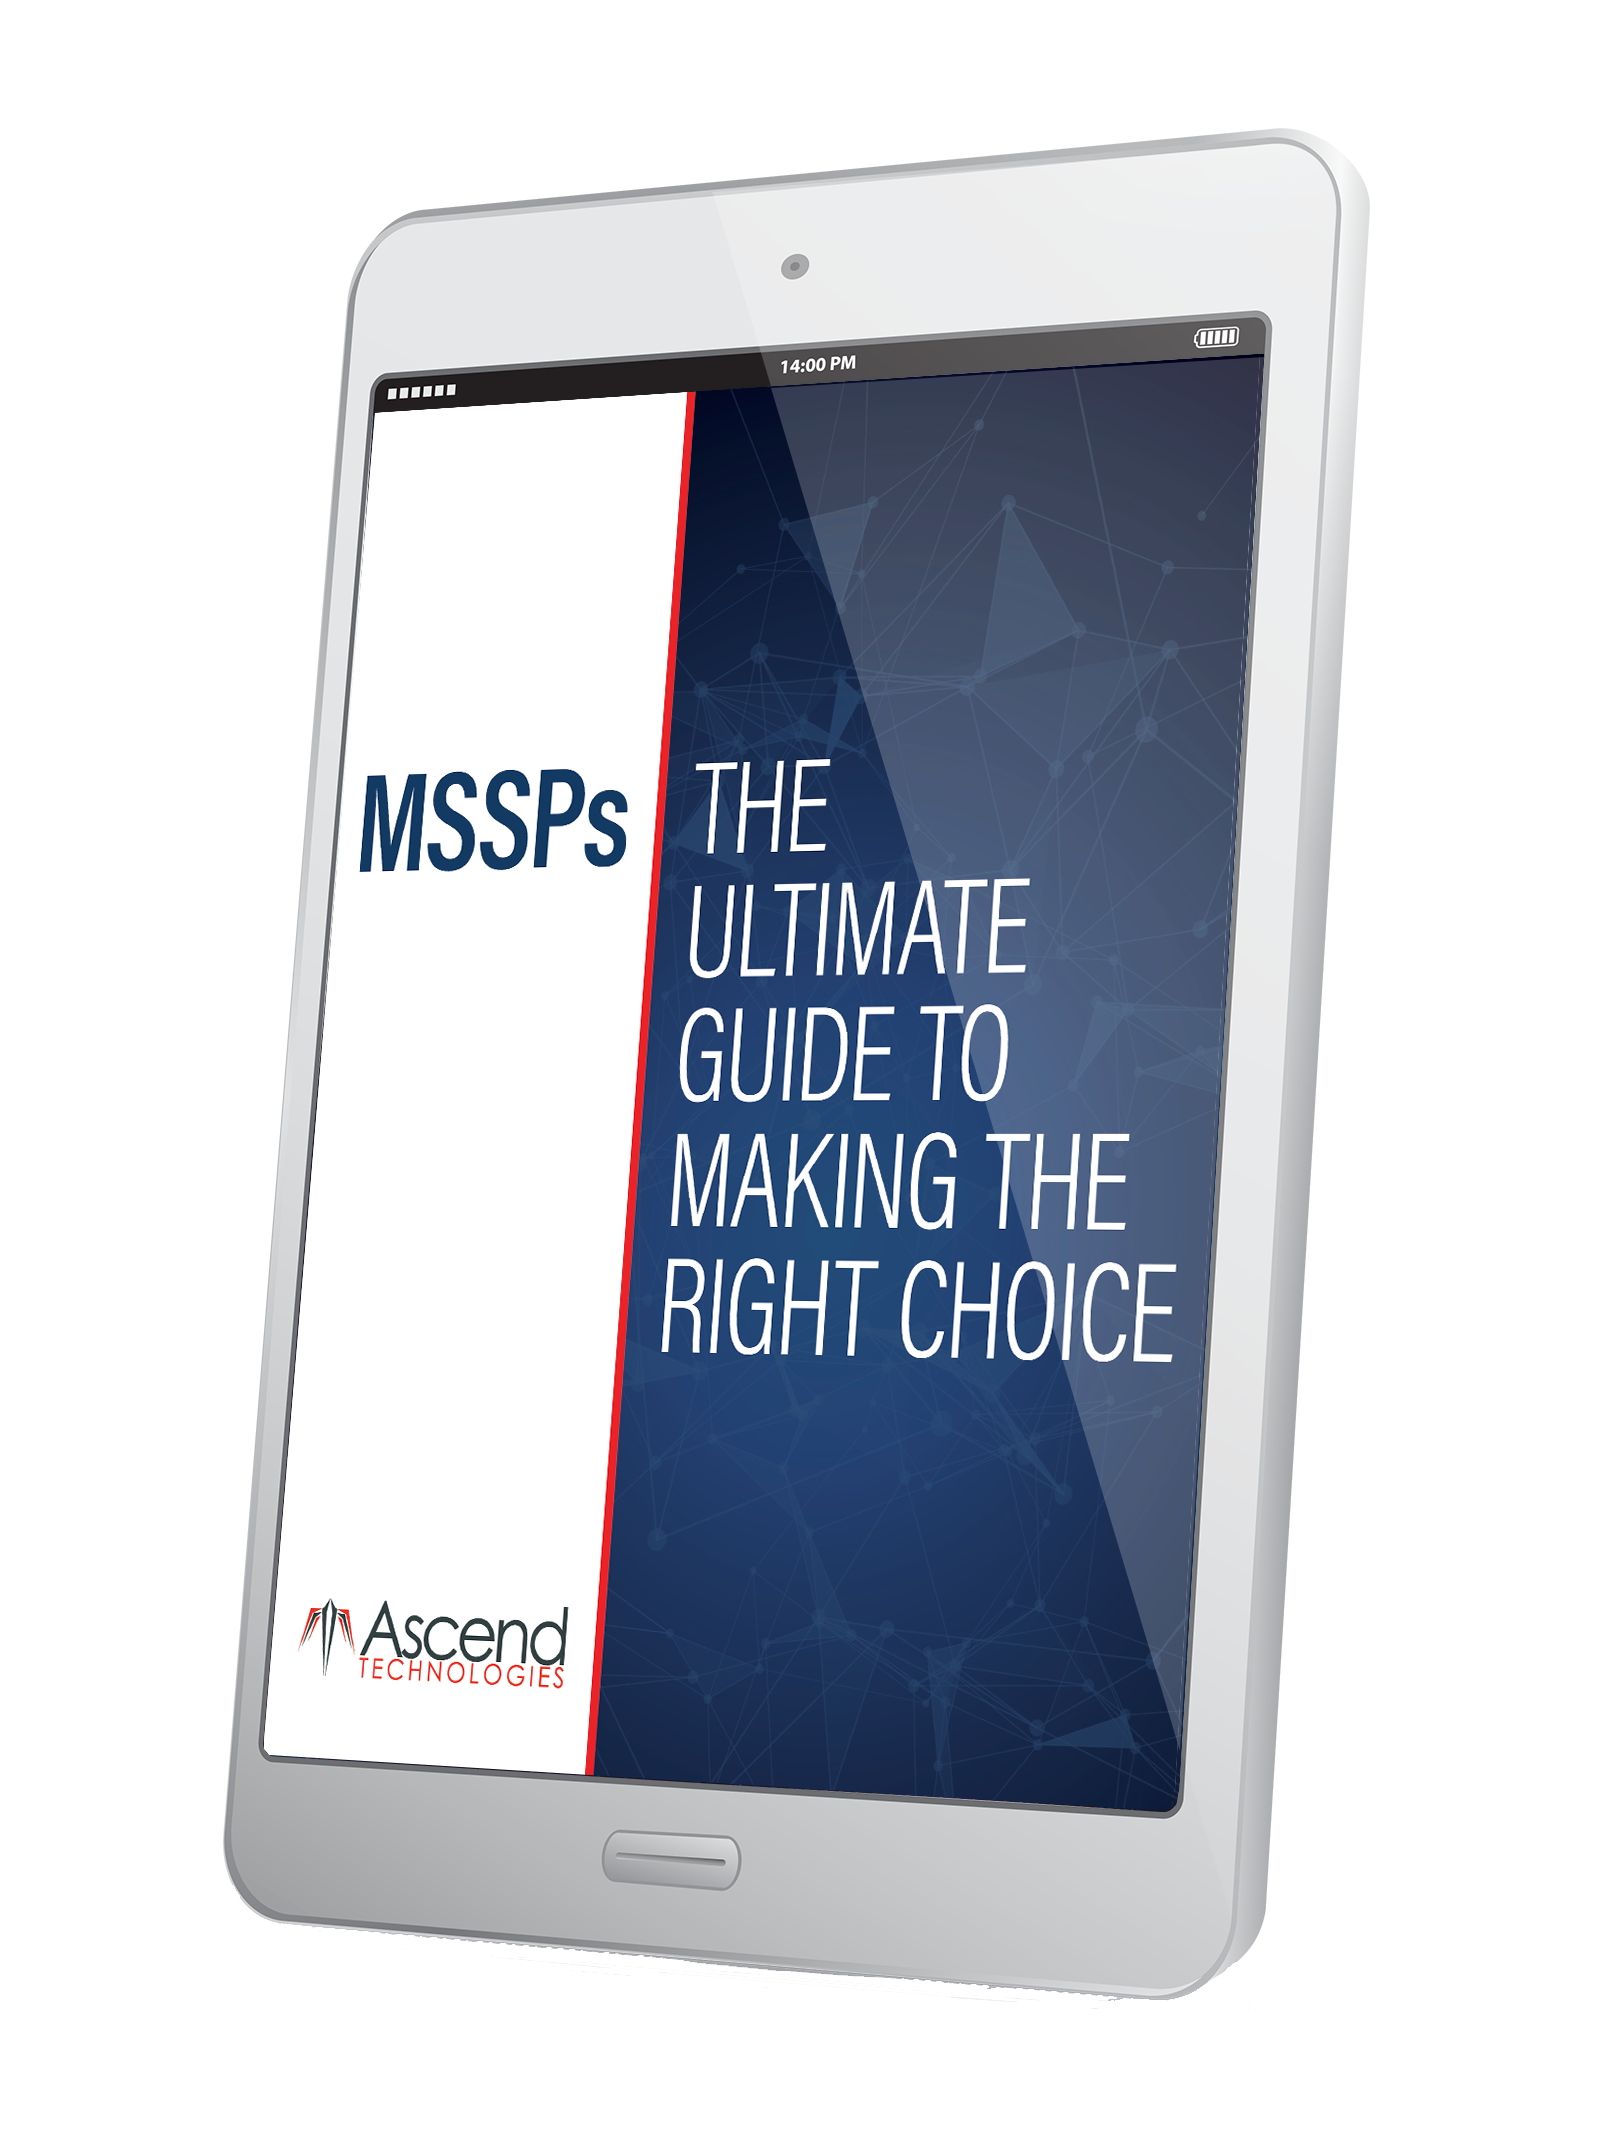 MSSPs: The Ultimate Guide to Making the Right Choice